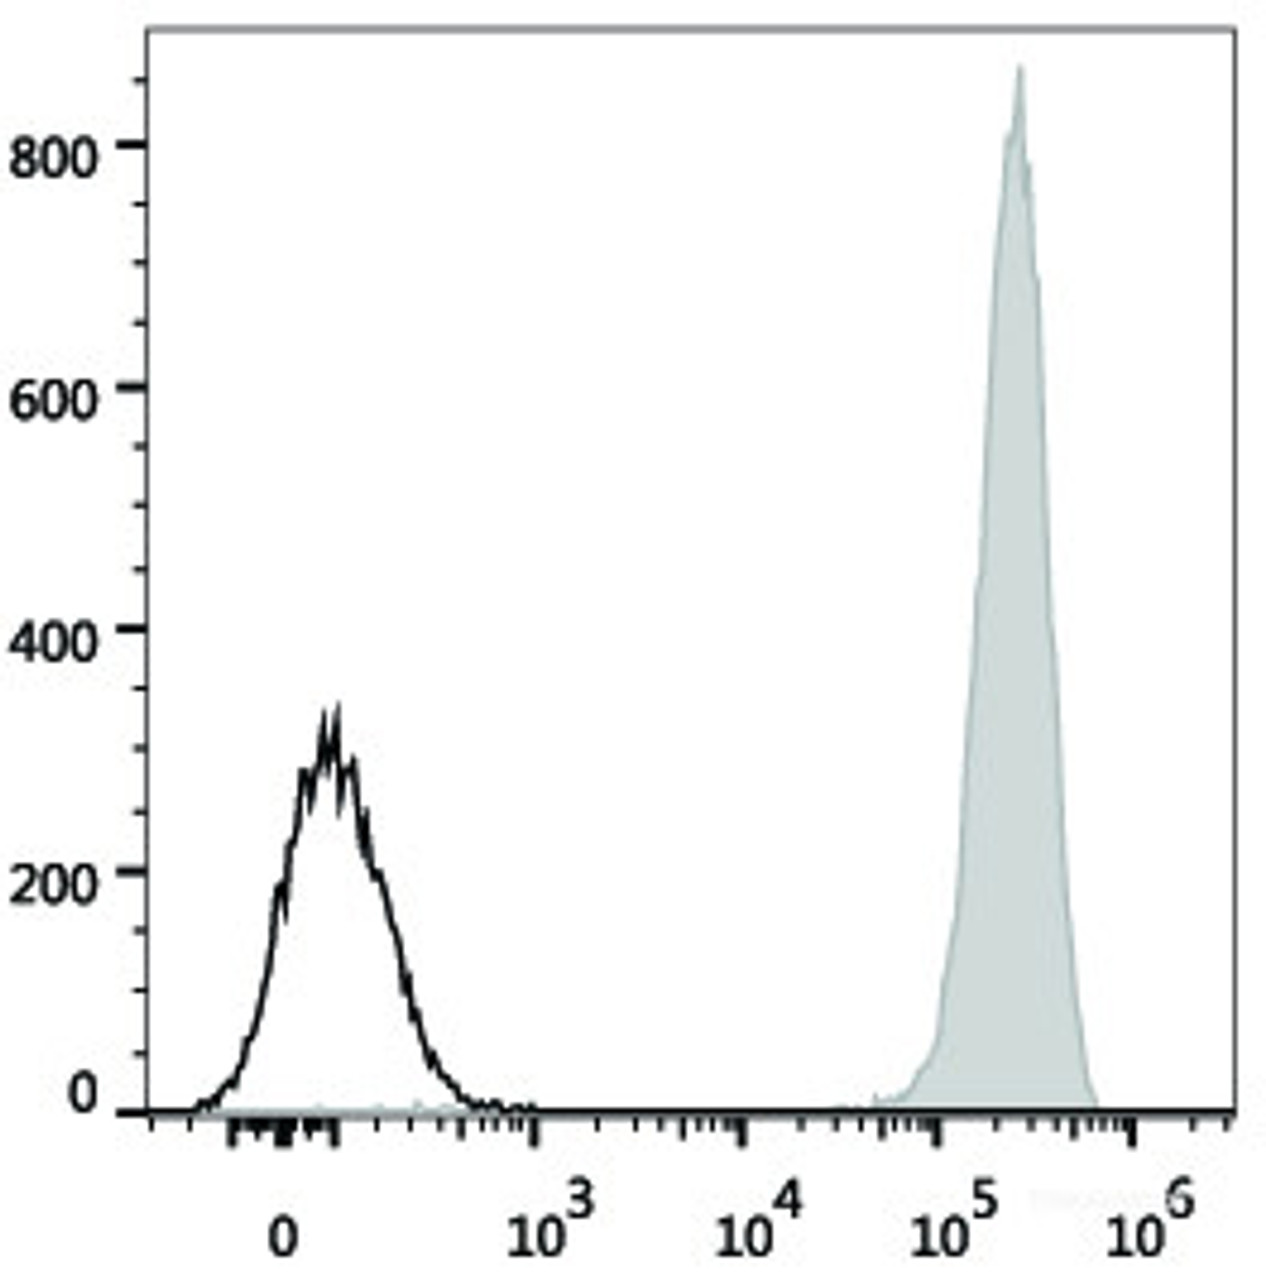 Human ErythroLeukemia cell line HEL are stained with FITC Anti-Human CD41 Antibody(filled gray histogram). Unstained Human ErythroLeukemia cell line HEL (empty black histogram) are used as control.